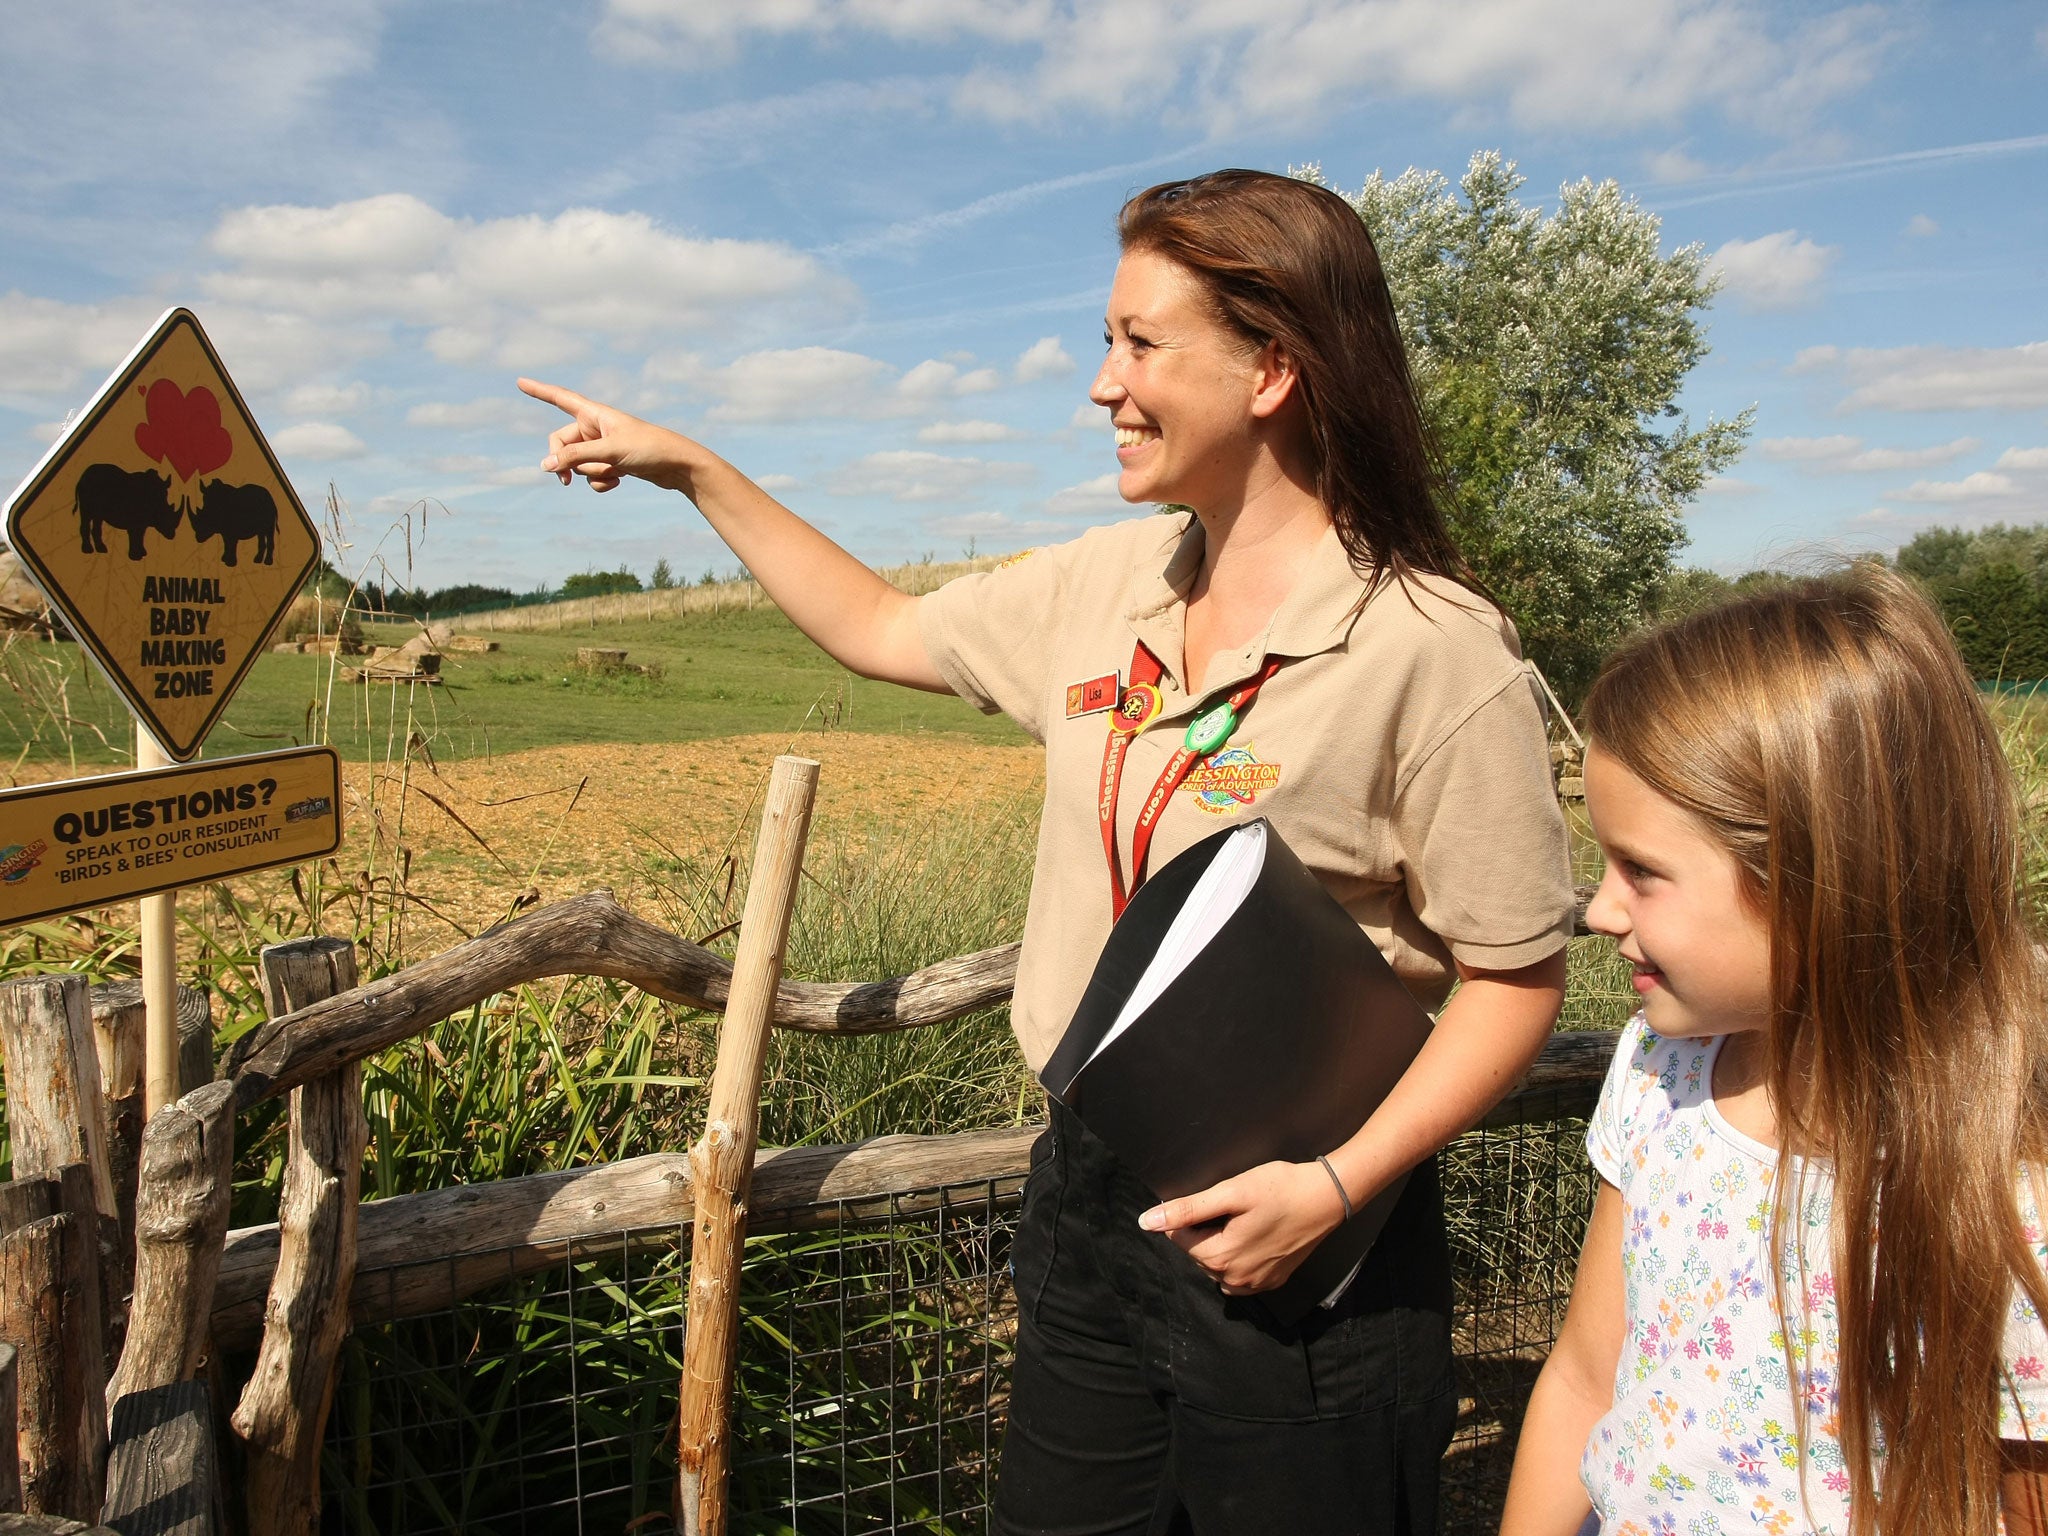 Chessington World of Adventures hires 'Birds and the Bees' Consultant, Lisa Britton, following a recent baby boom at the park